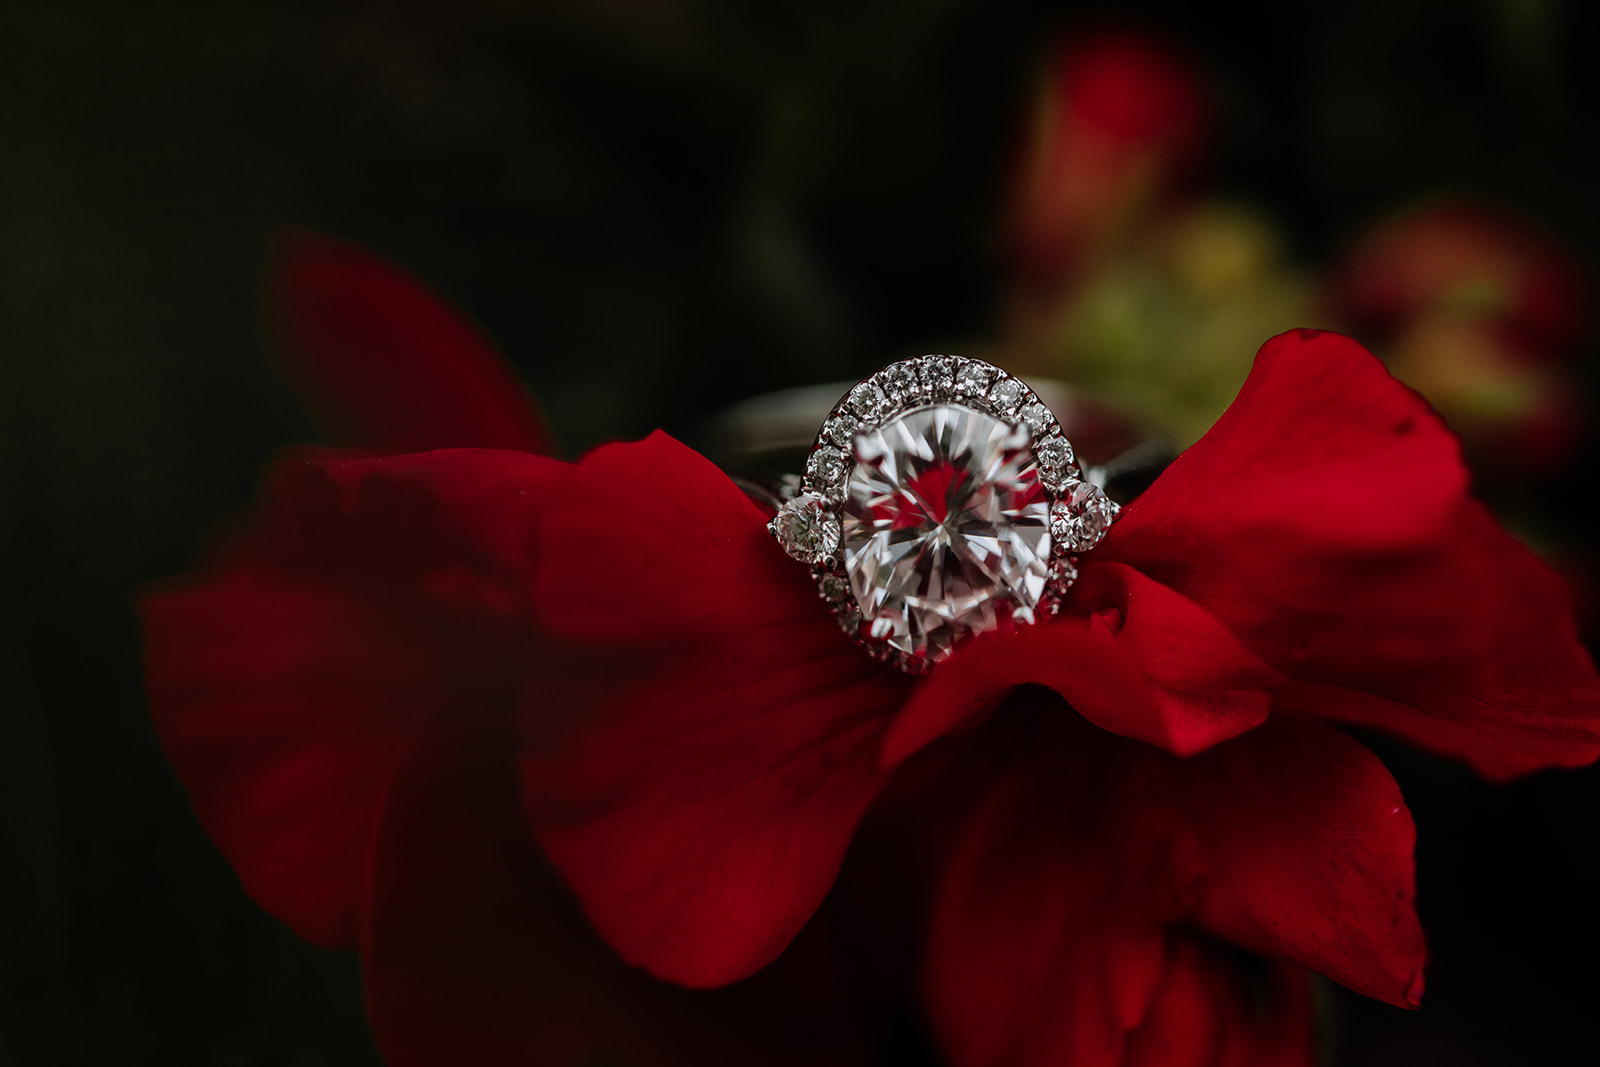 Unique Concept Wedding Photoshoot With Reflected On Rings | 99inspiration